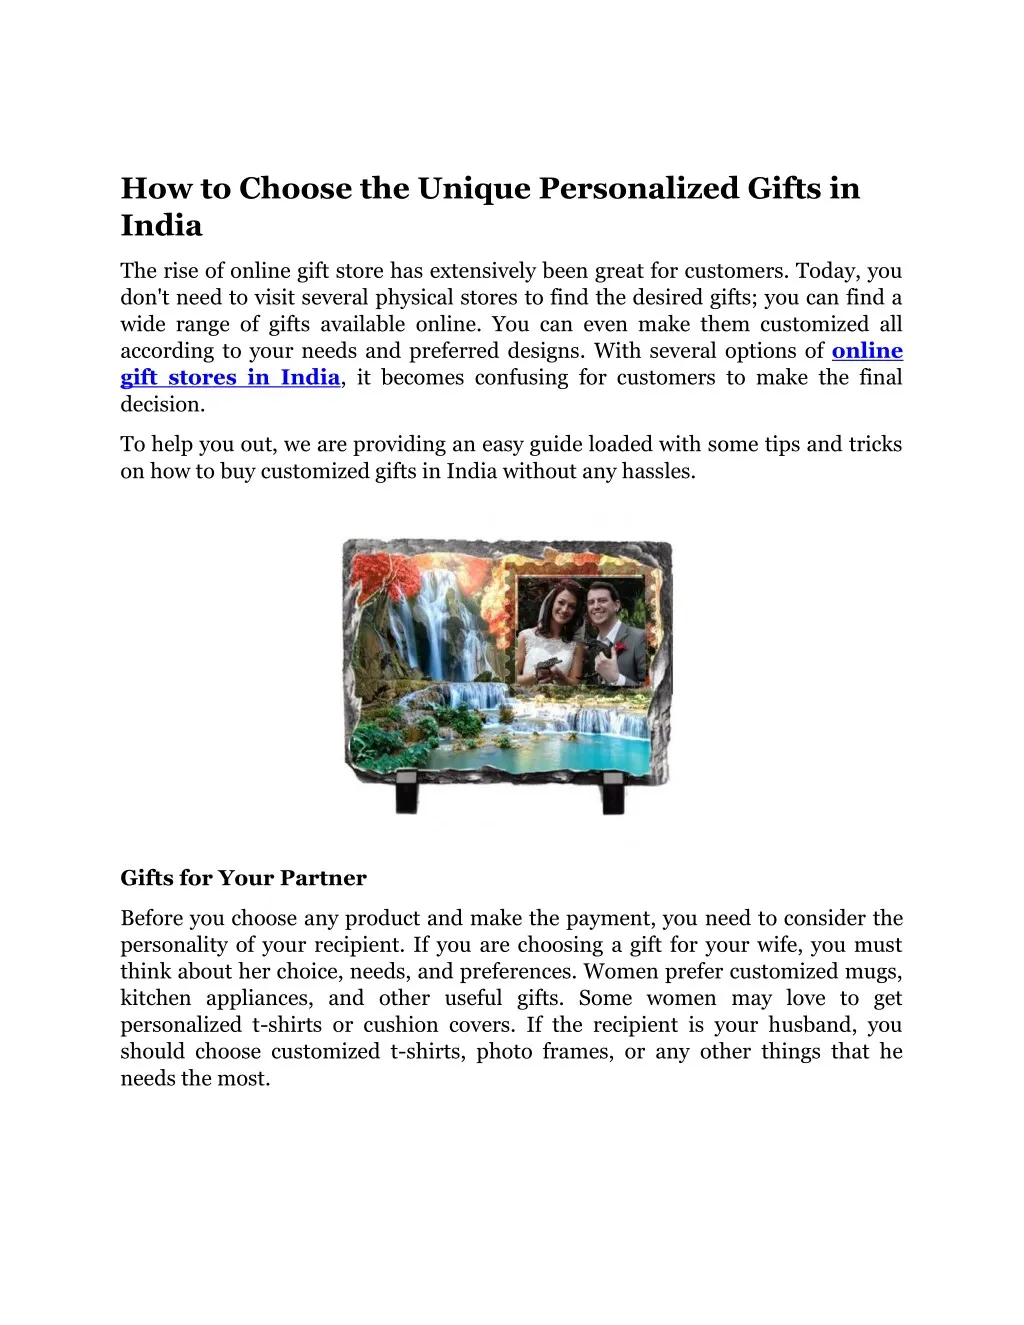 how to choose the unique personalized gifts